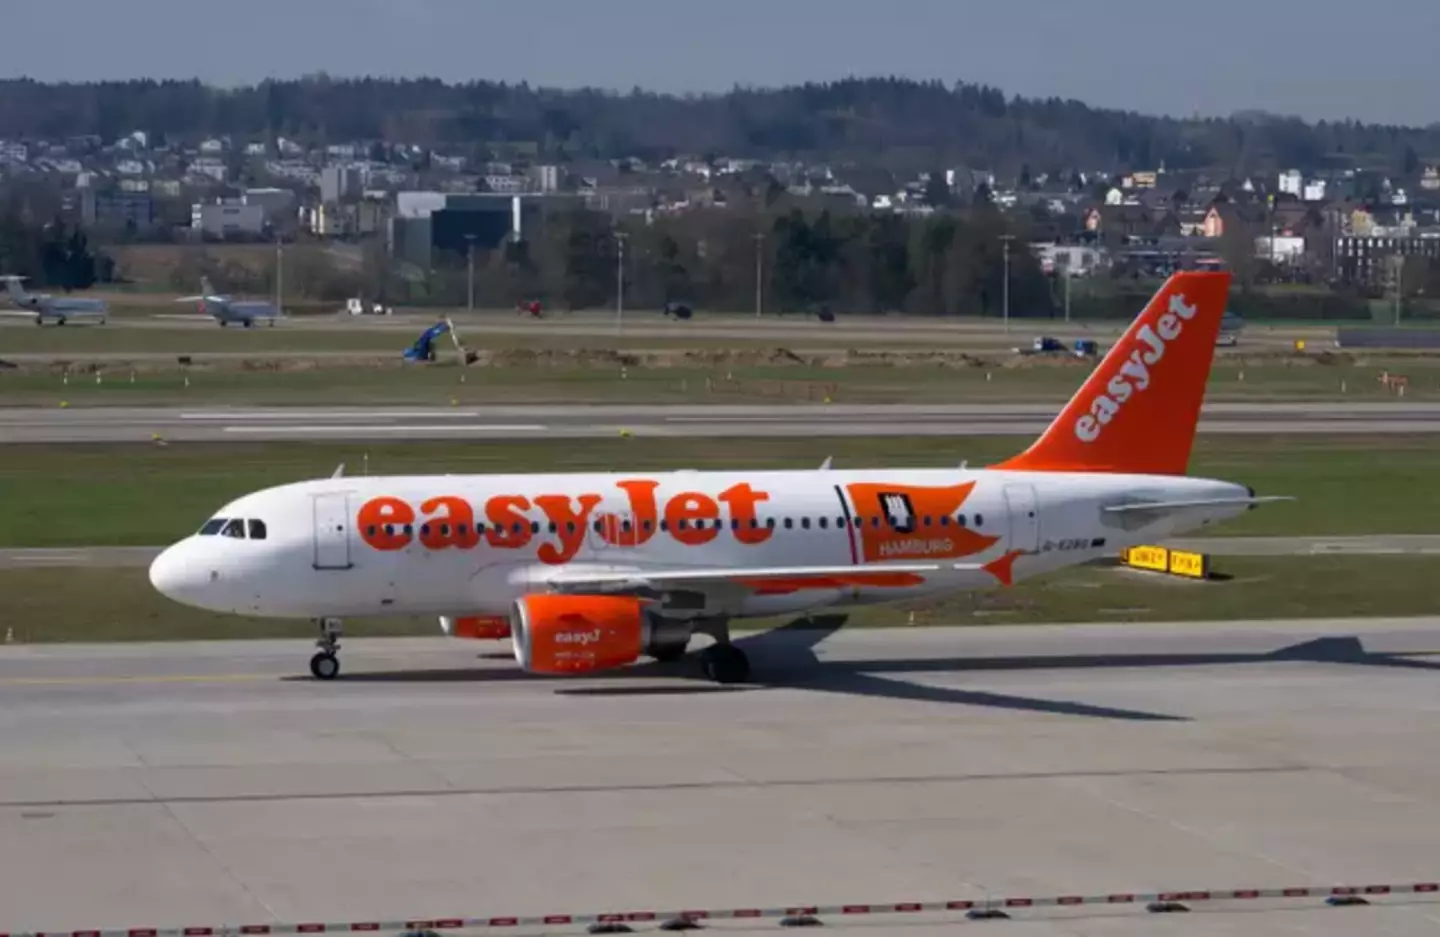 The unruly passenger was removed from the easyJet flight.